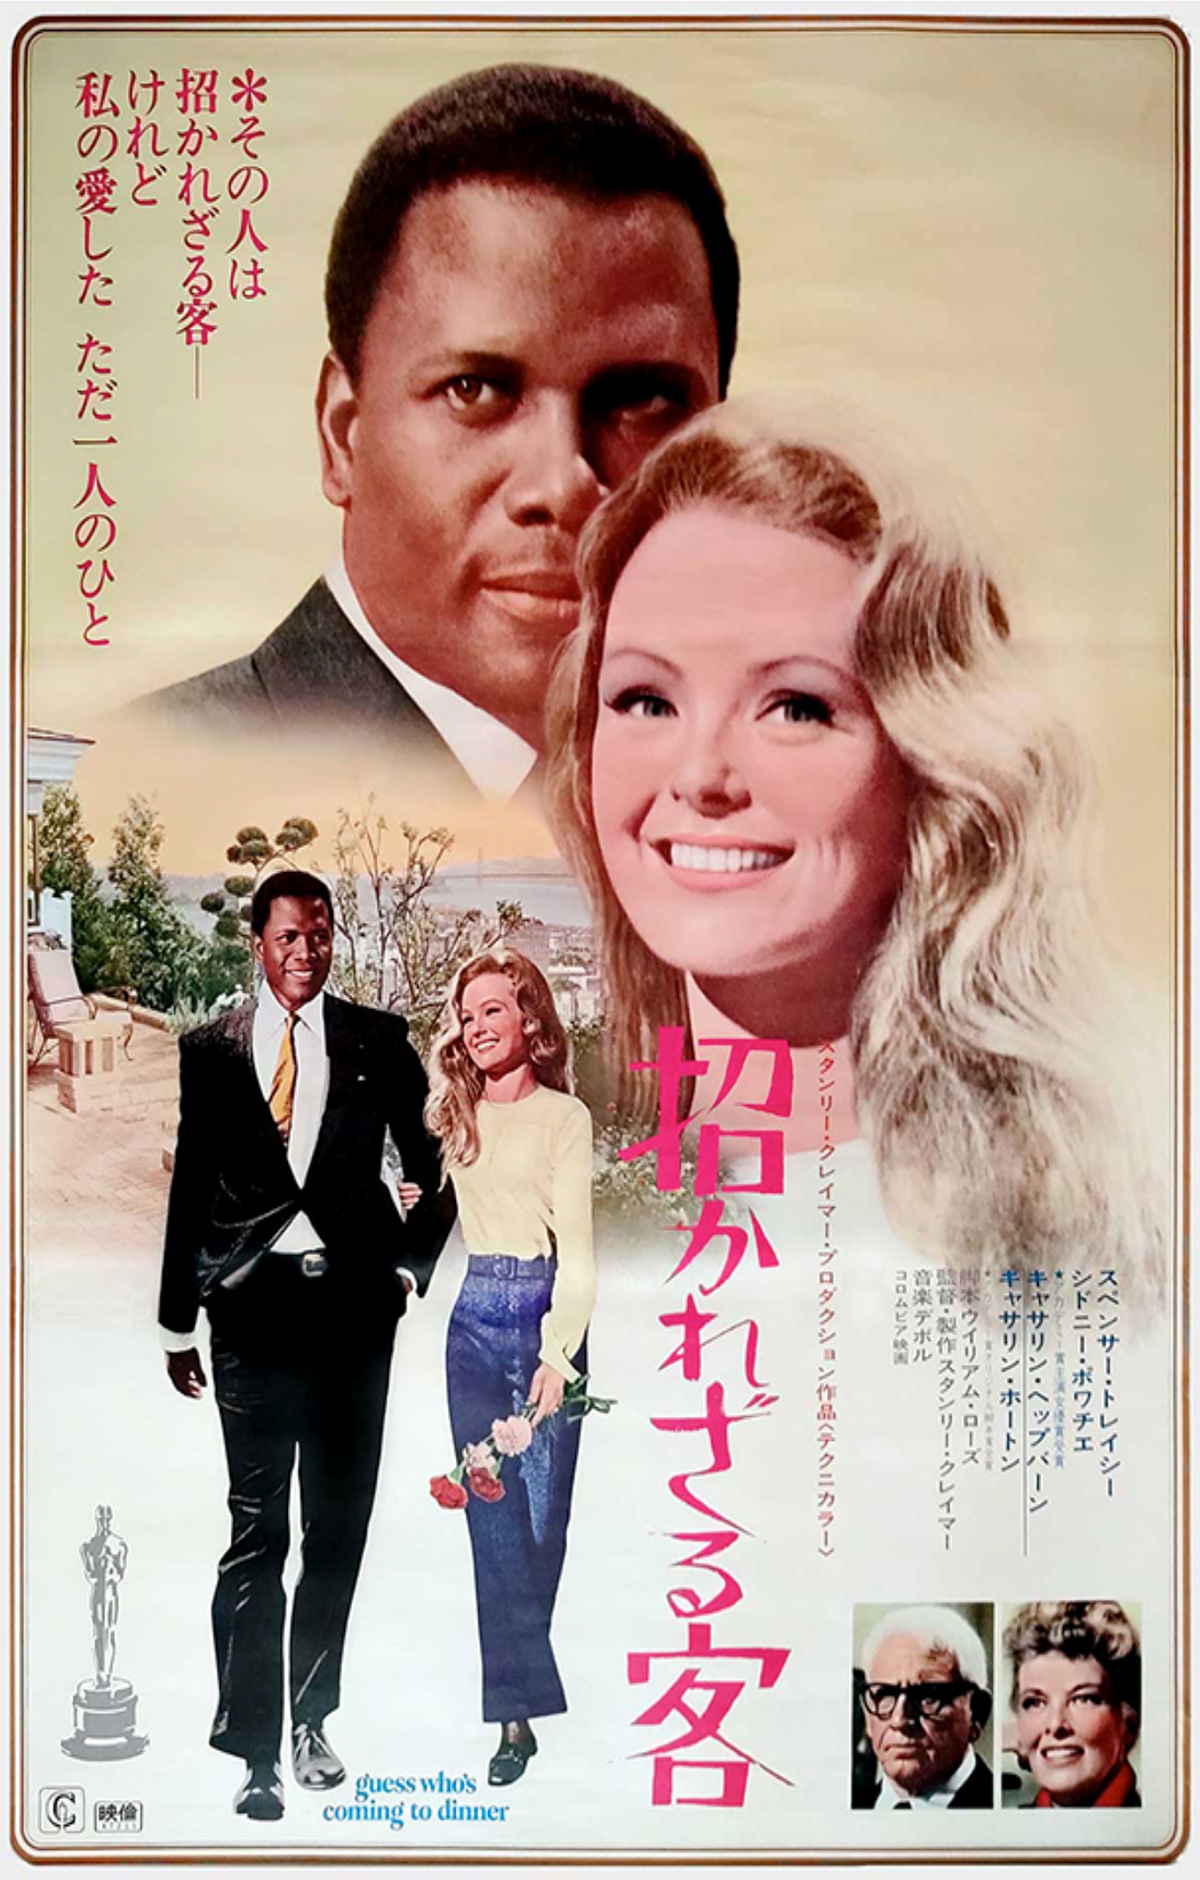 Guess Who's Coming To Dinner - Japanese Poster